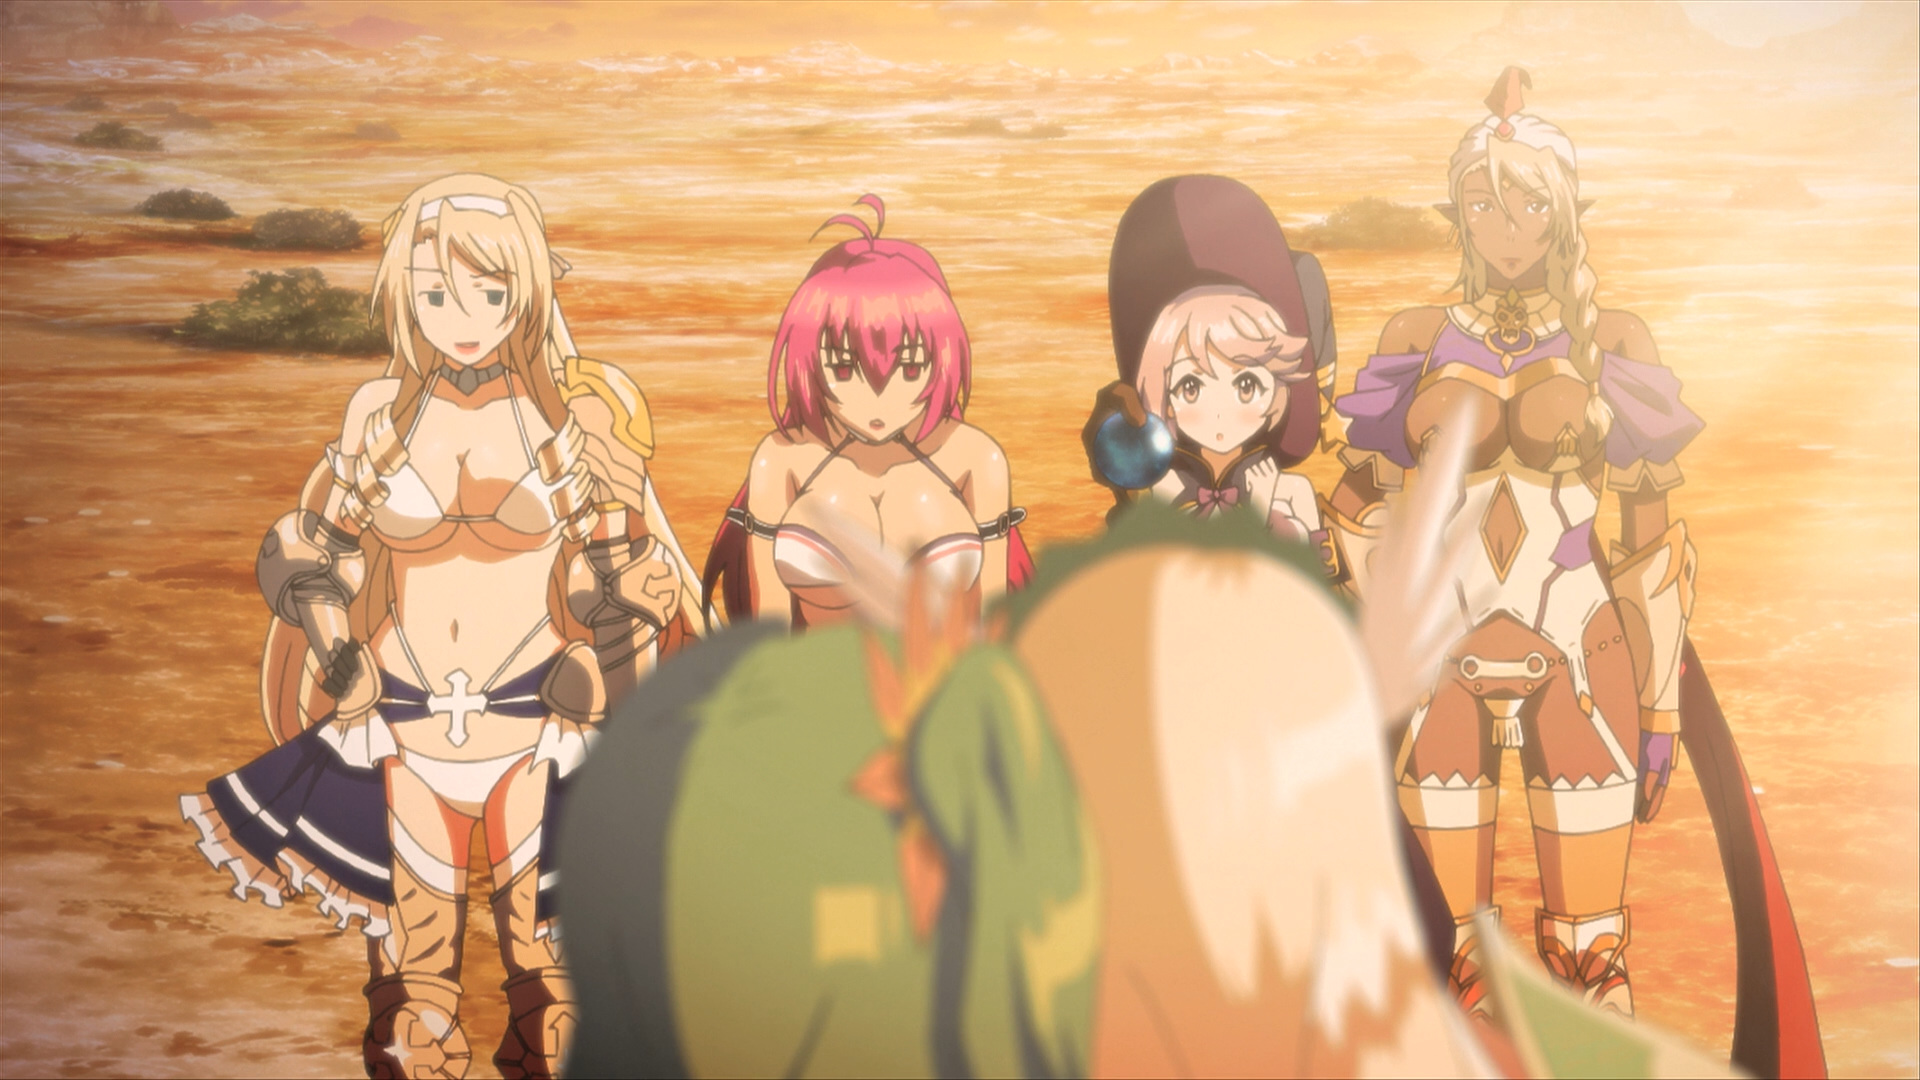 Though the Bikini Warriors stand strong as four, they’re willing to take on...